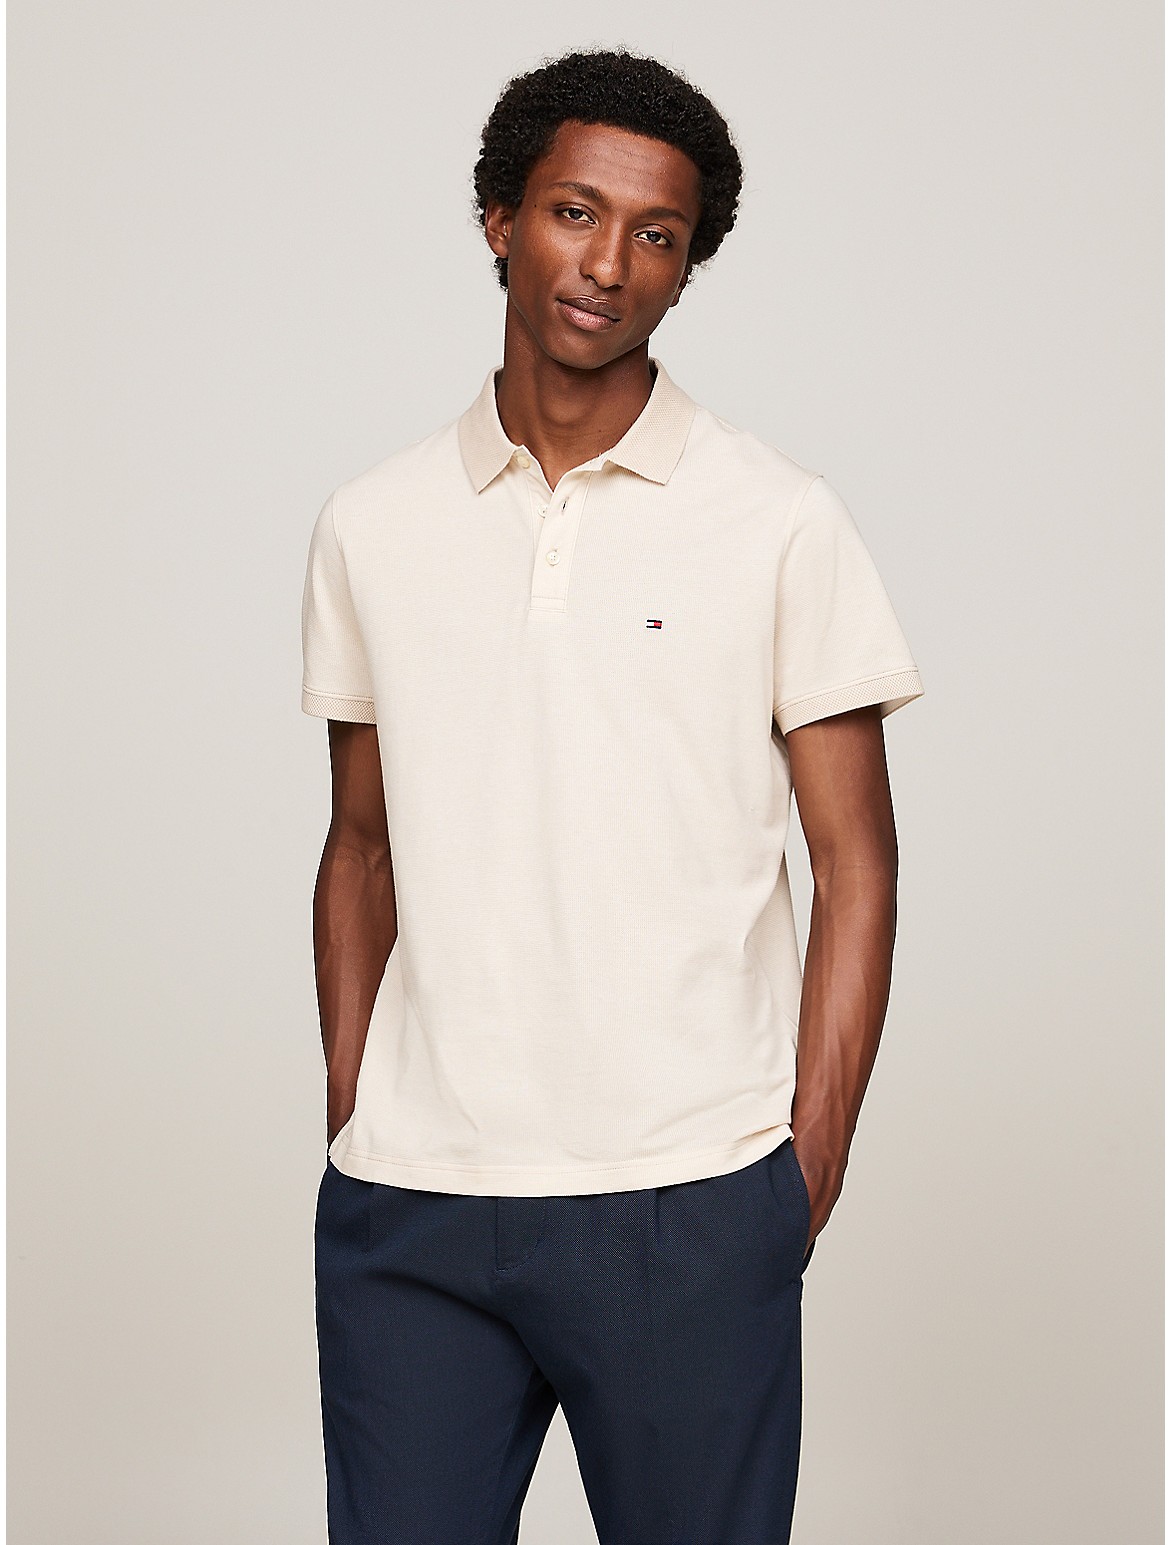 Tommy Hilfiger Men's Regular Fit Two-Tone Polo